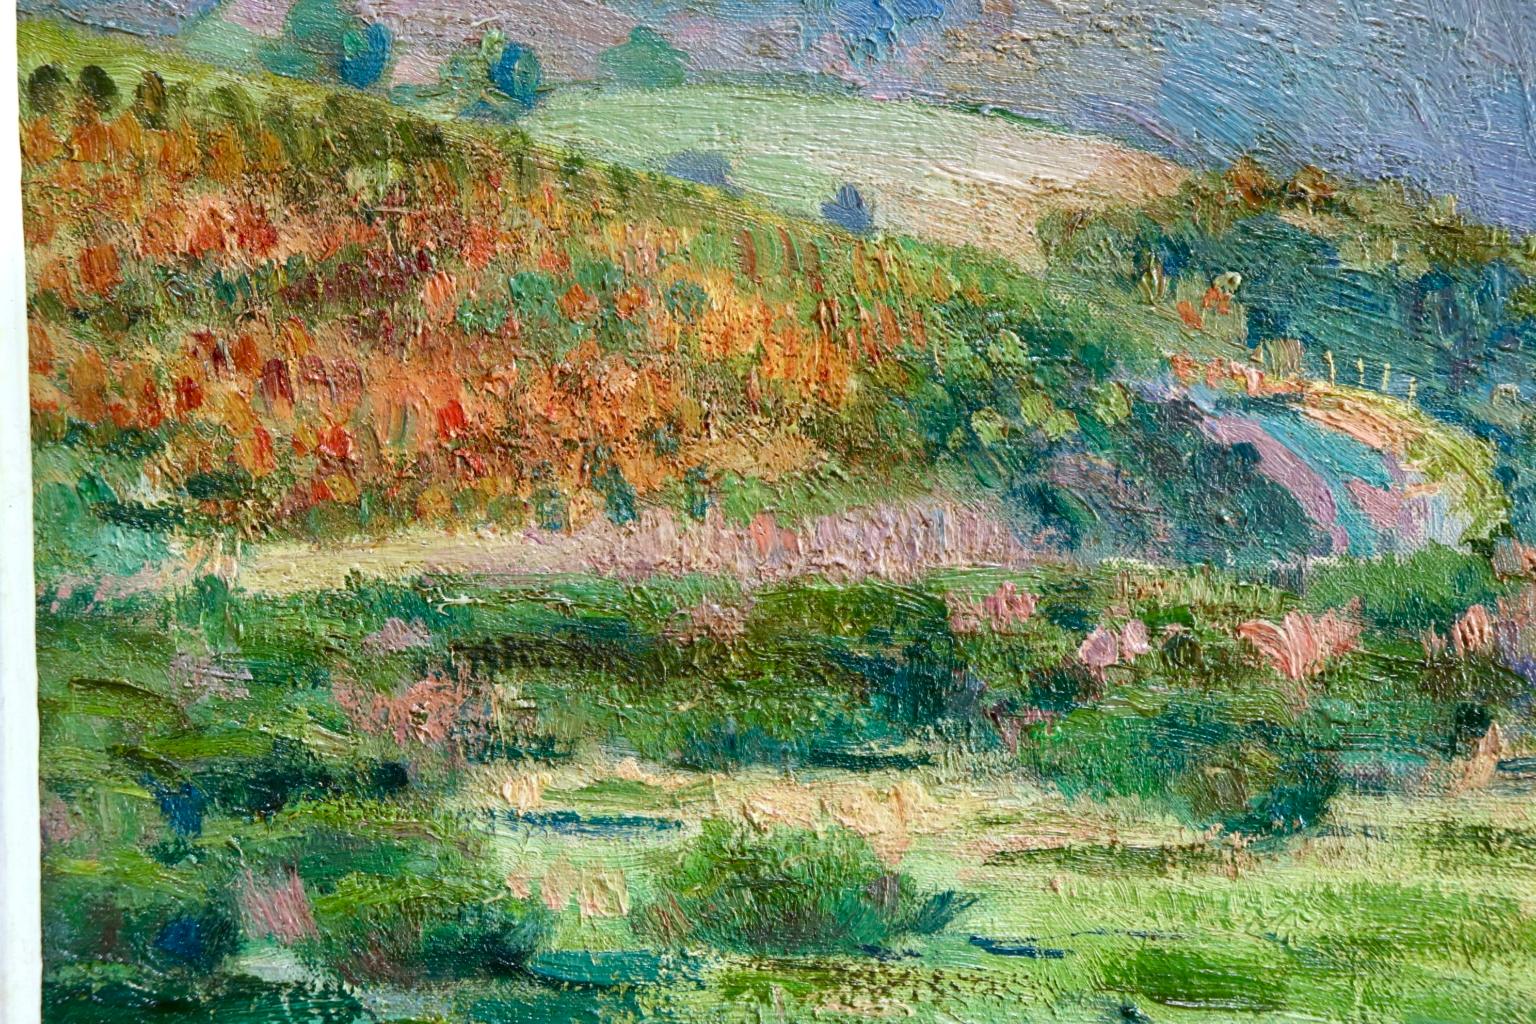 Donzy-le-Perthuis - Burgundy - Post Impressionist Oil, Landscape - H Petitjean - Post-Impressionist Painting by Hippolyte Petitjean